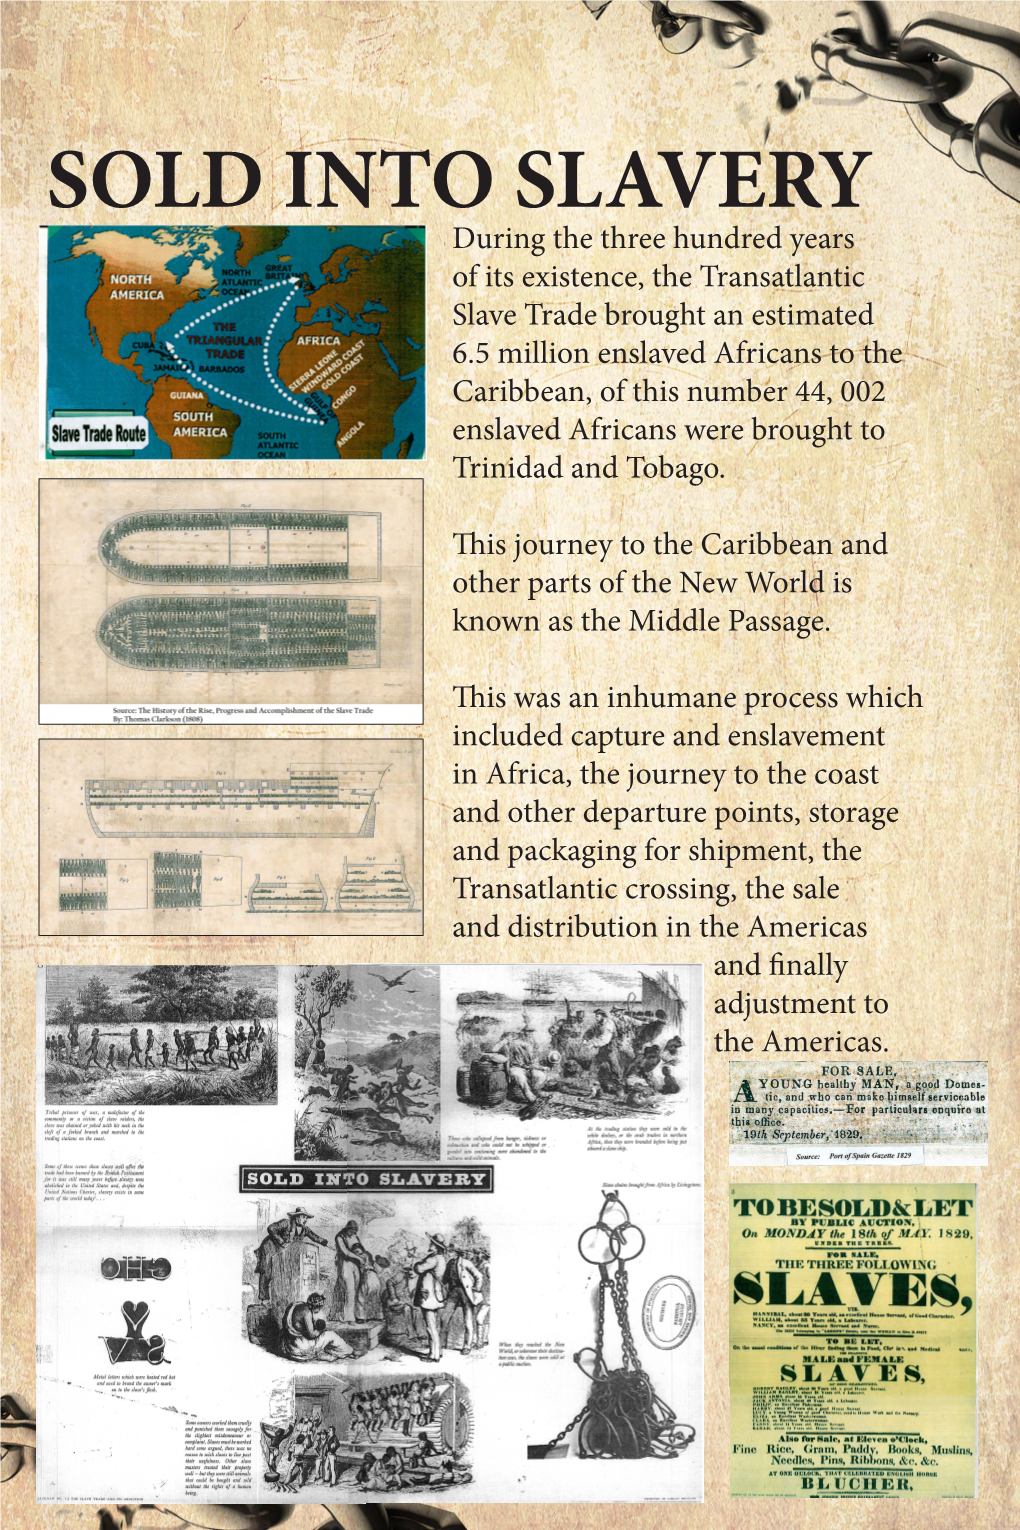 During the Three Hundred Years of Its Existence, the Transatlantic Slave Trade Brought an Estimated 6.5 Million Enslaved African